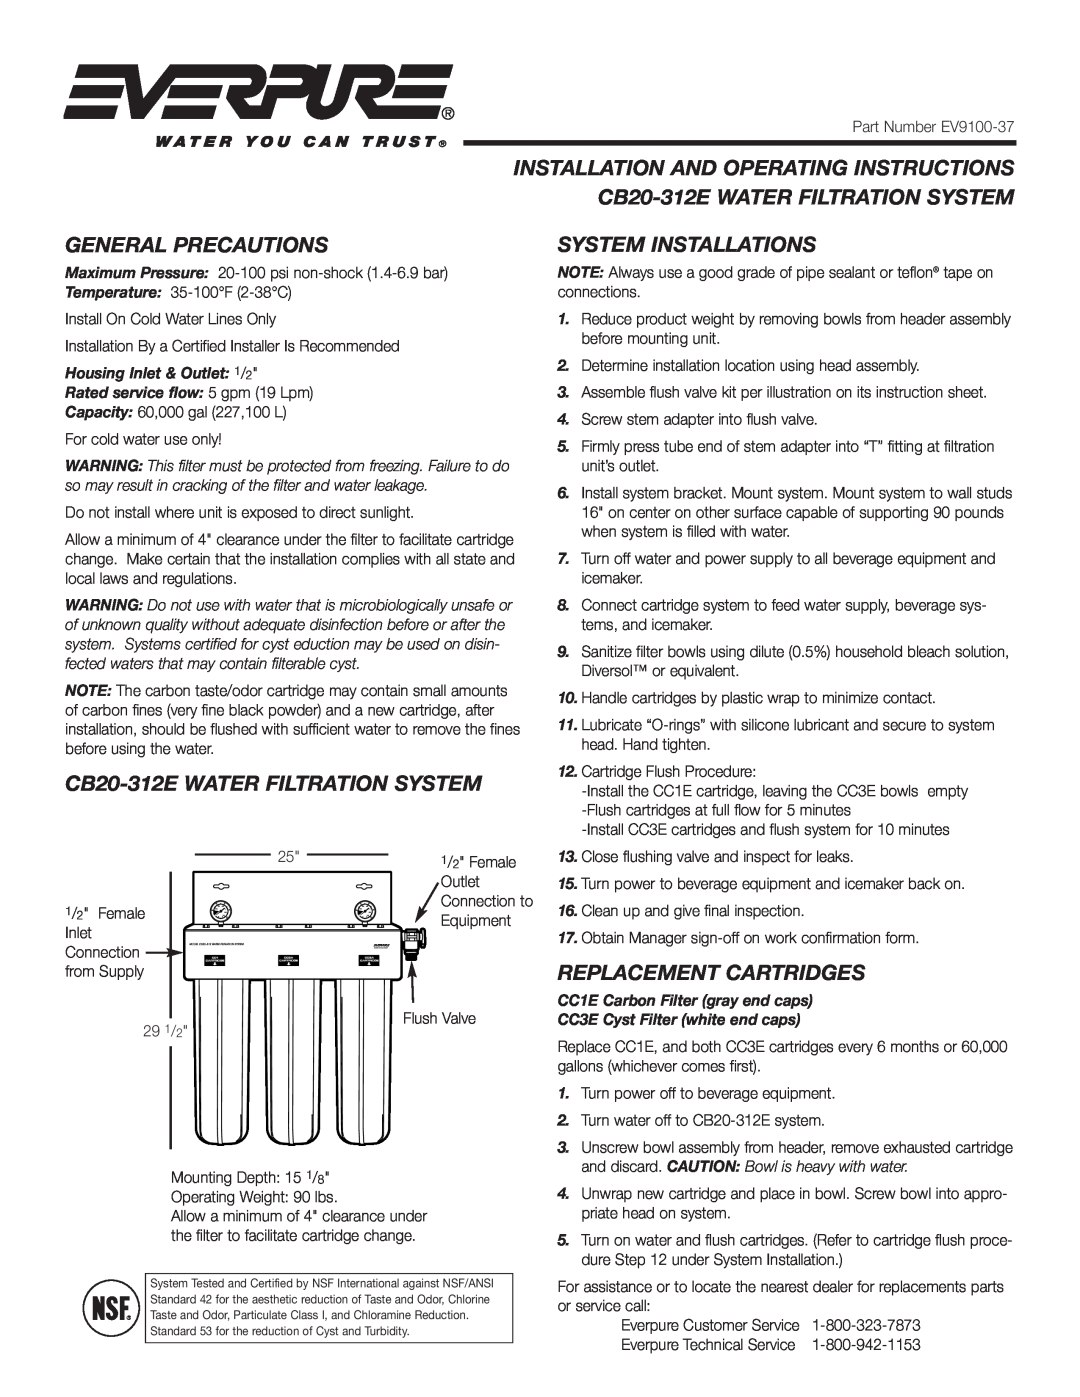 Everpure instruction sheet General Precautions, System Installations, CB20-312E WATER FILTRATION SYSTEM 